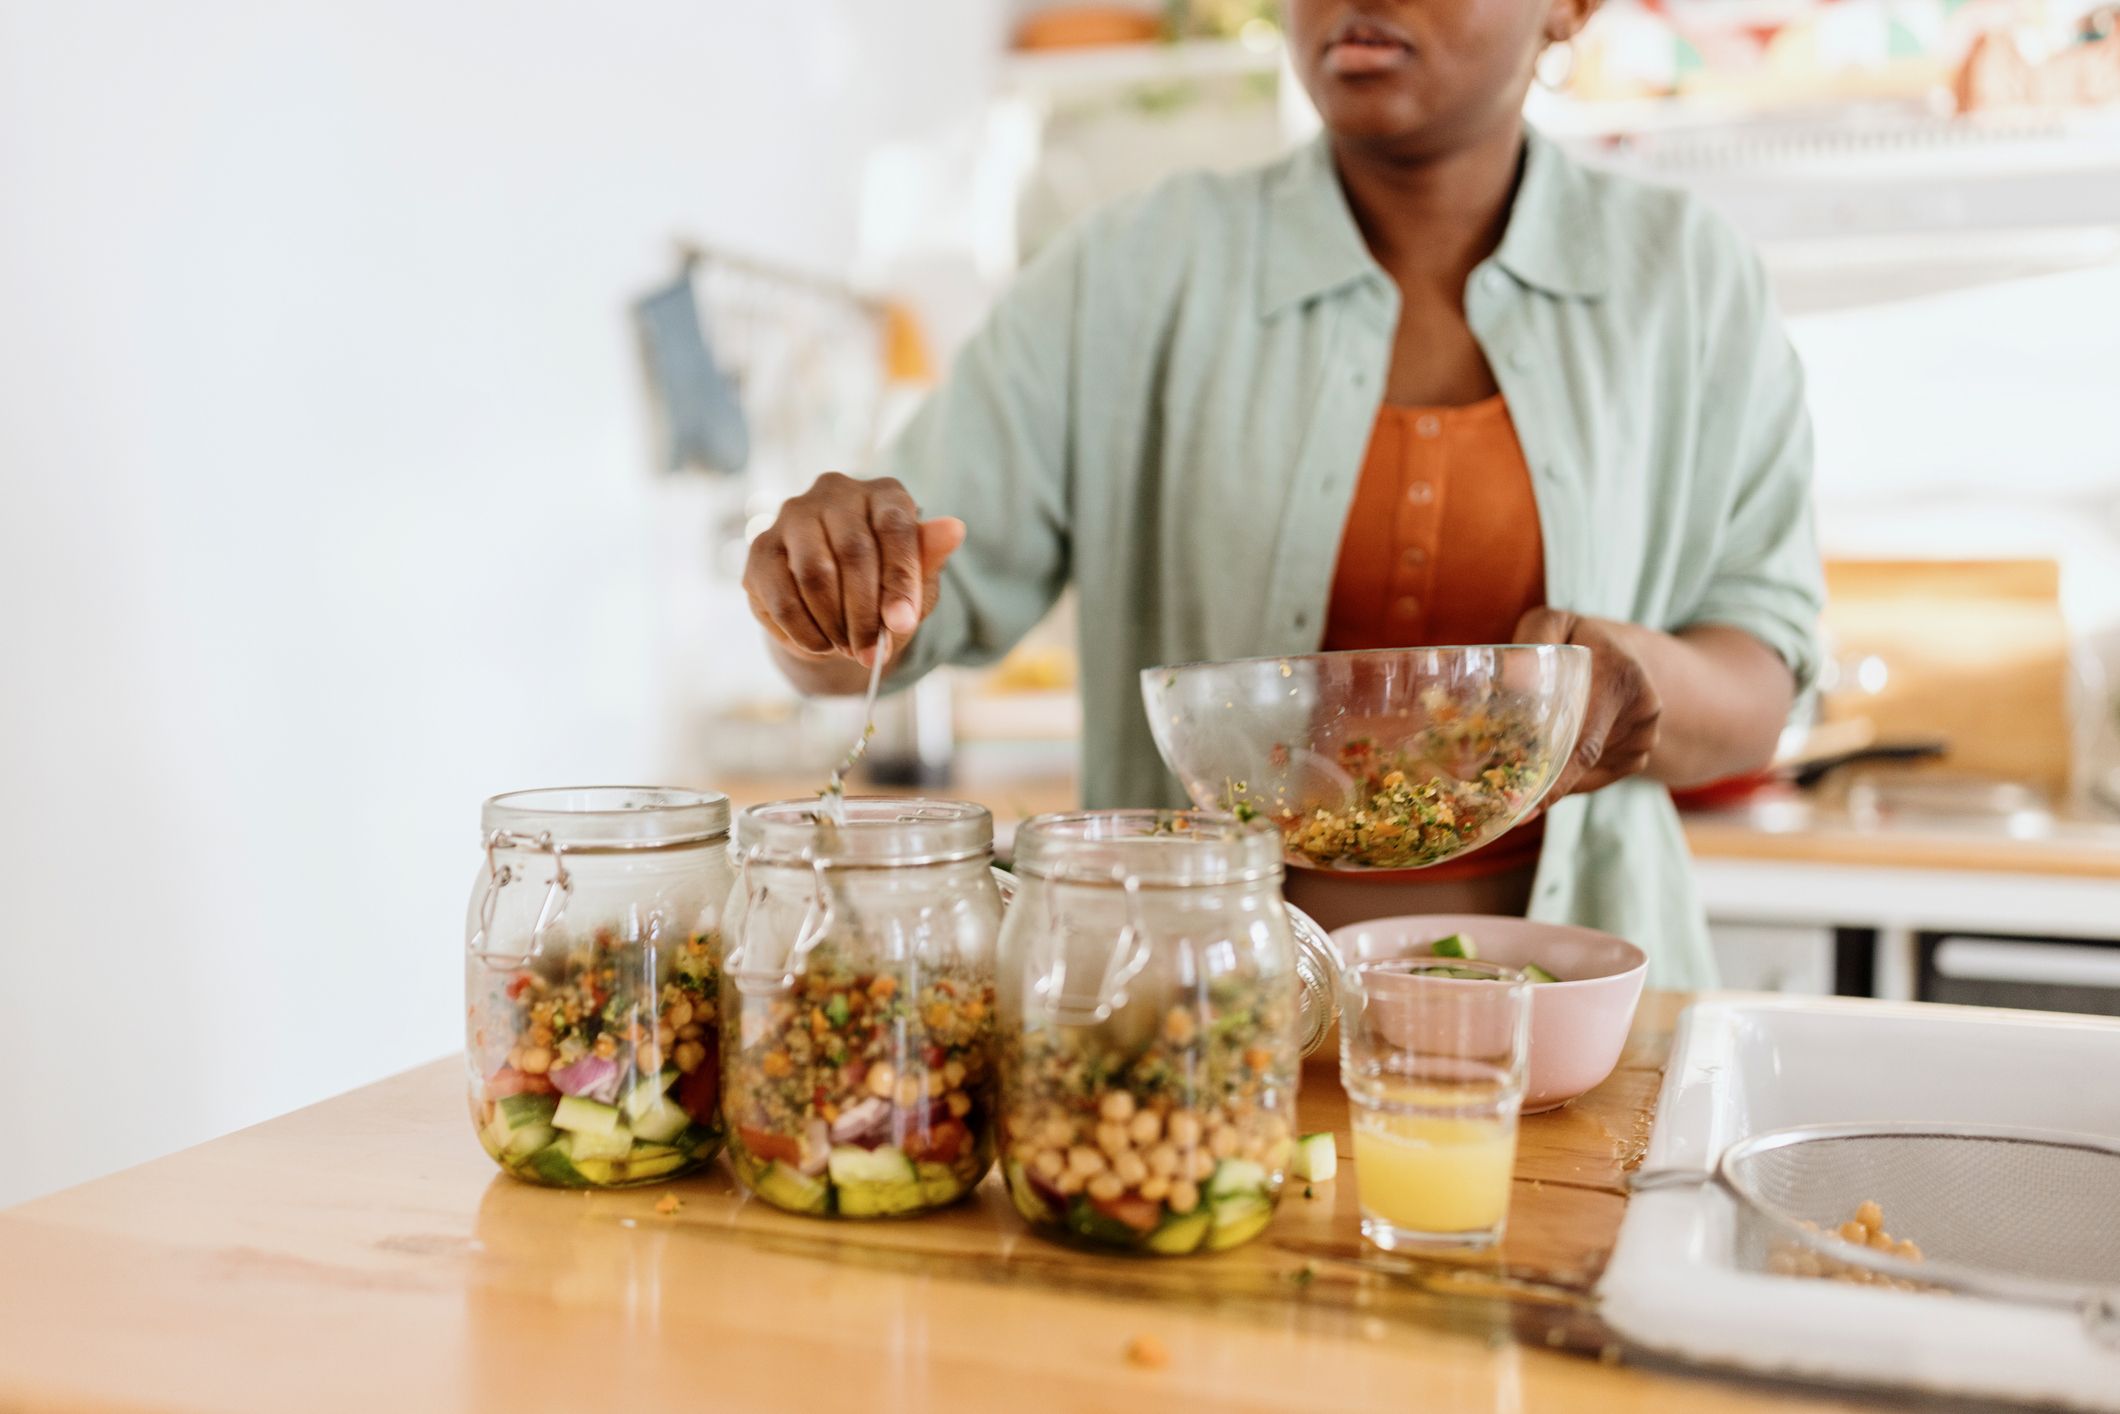 Mastering Your New Year's Resolution with Meal Prep in a Jar